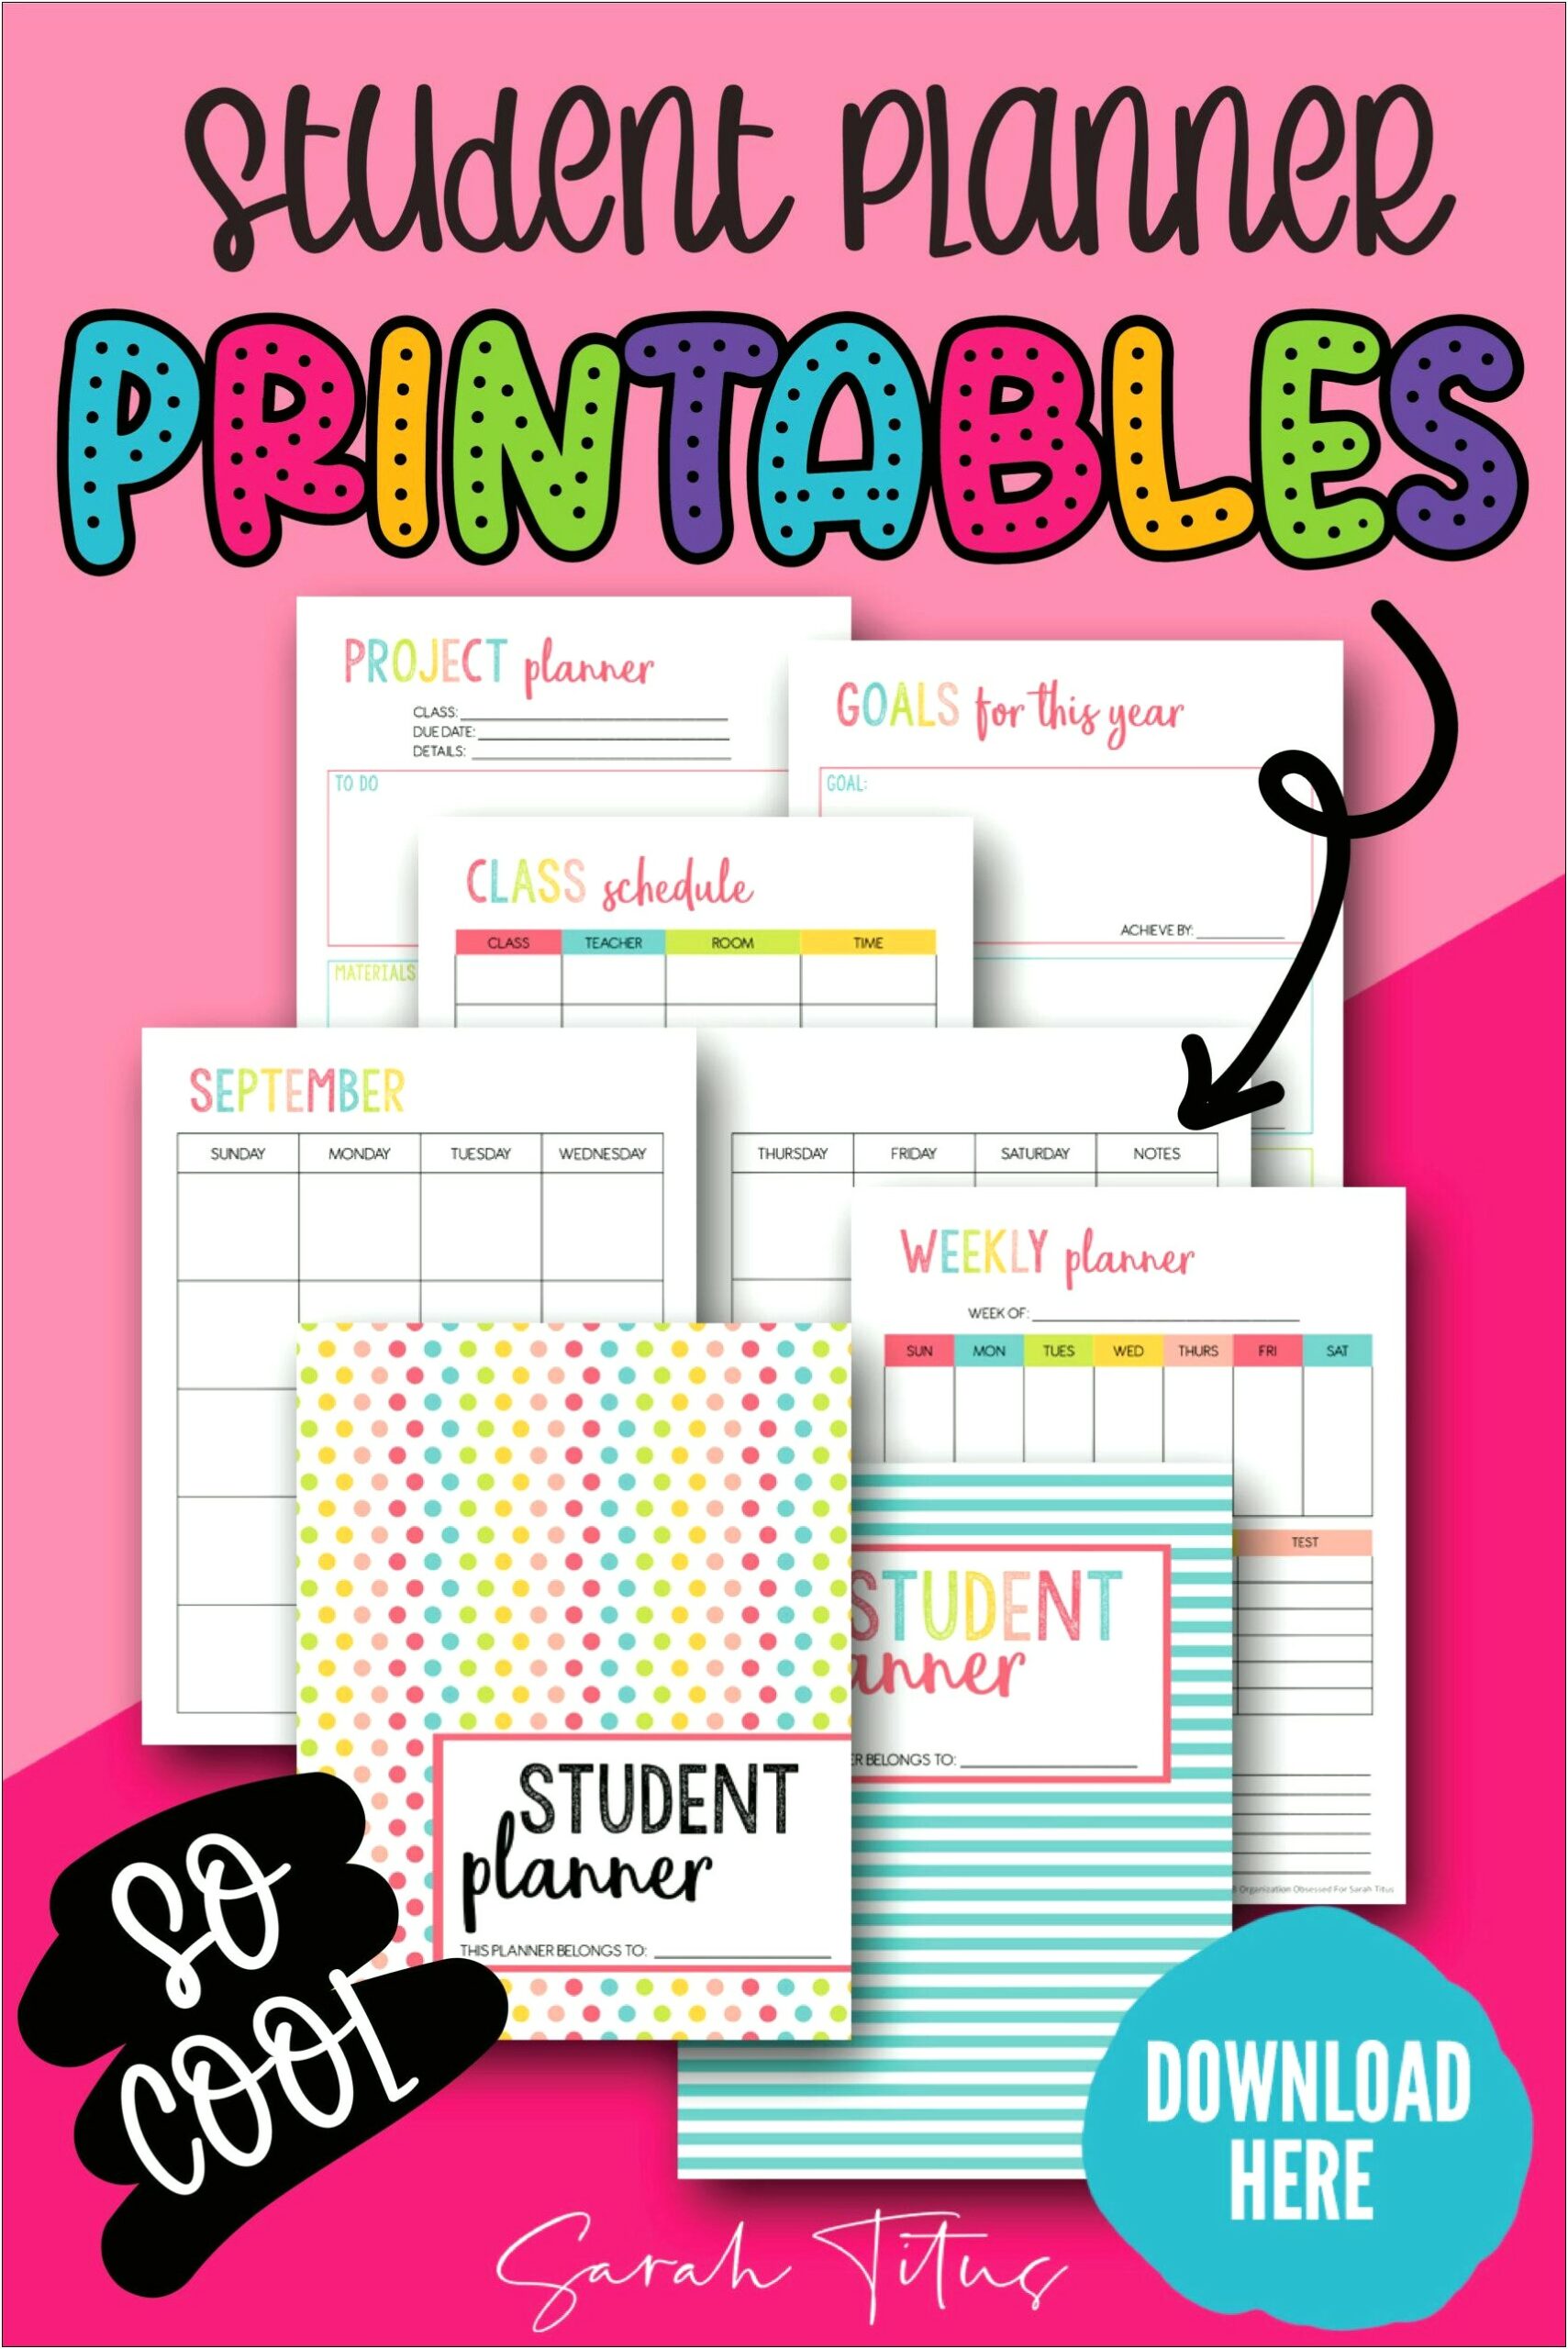 Free Templates Planners For Middle School Students